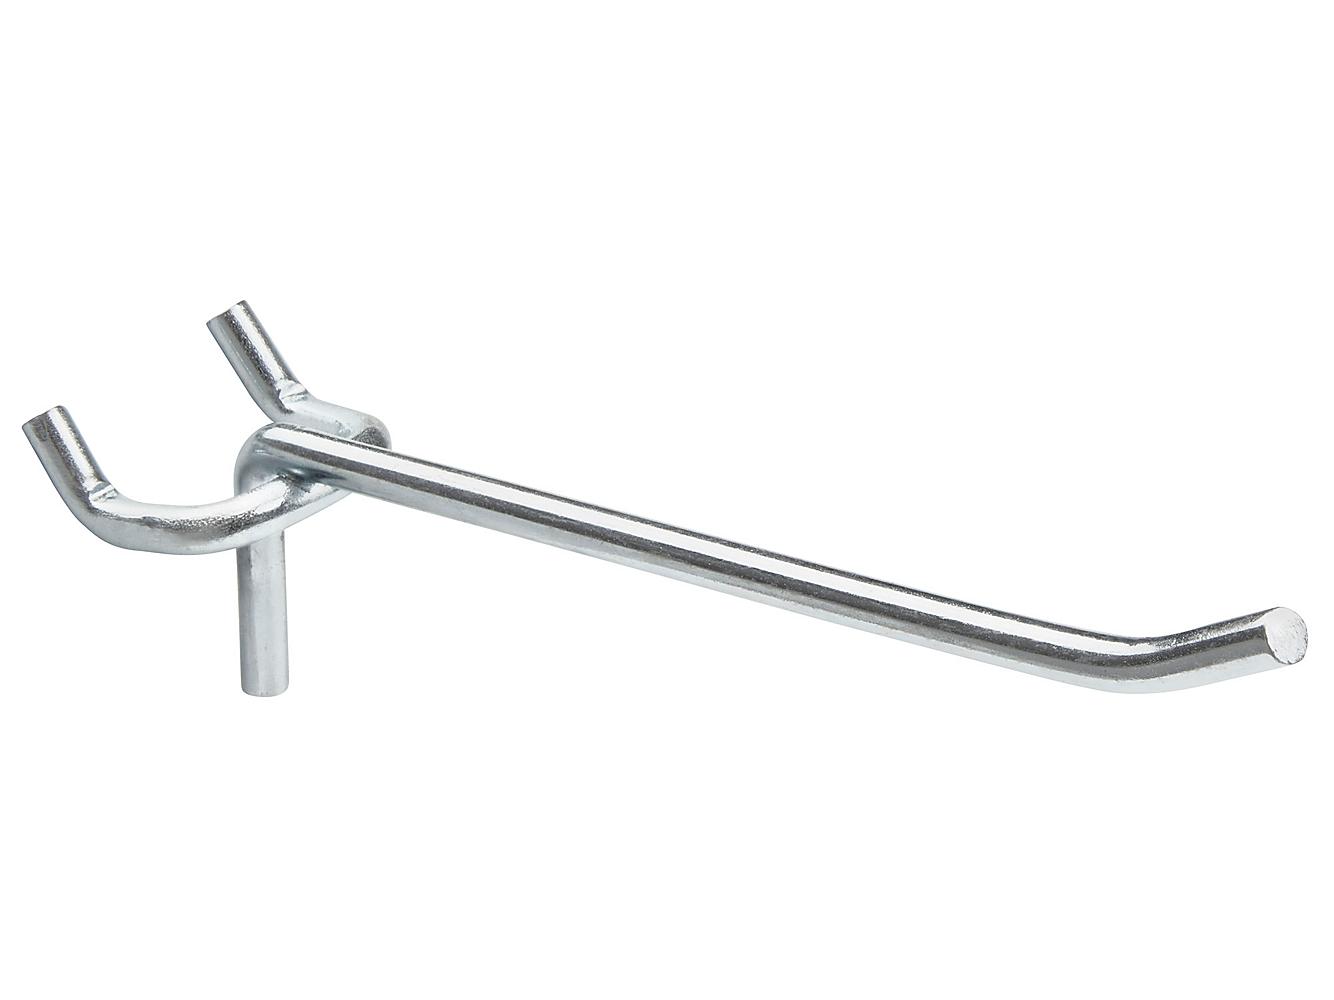 straight-hooks-for-pegboard-5-zinc-plated-h-2688-uline